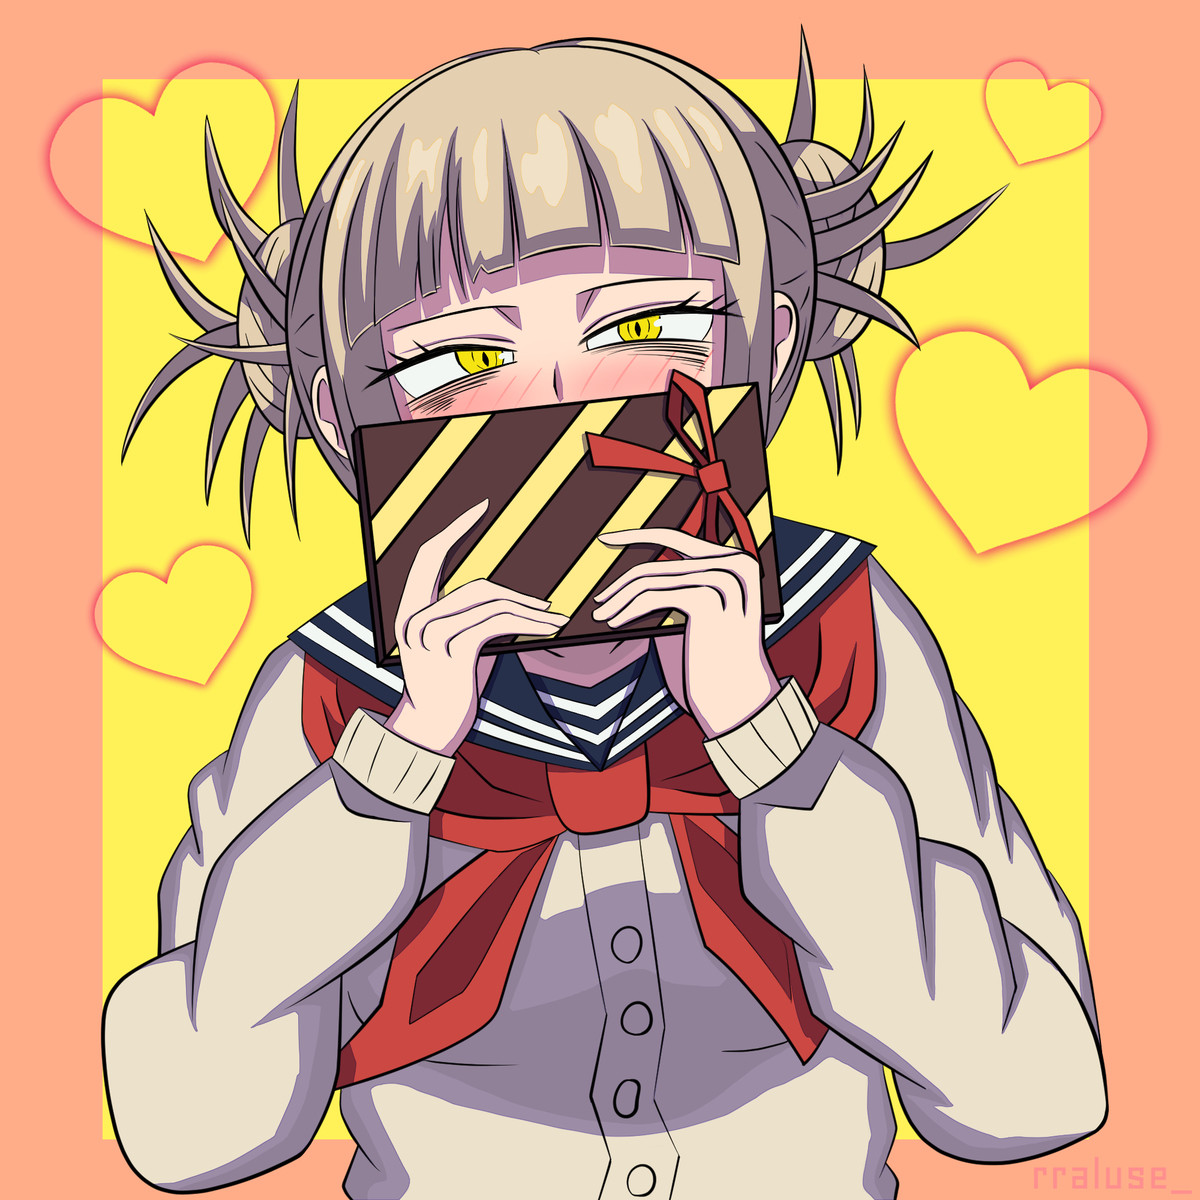 Daily Toga - 938: May contain trace amounts of blood. join list: DailyToga (476 subs)Mention History Source: .. is the trace amount of blood her period, cause she feels like the kind of crazy that'd do that.